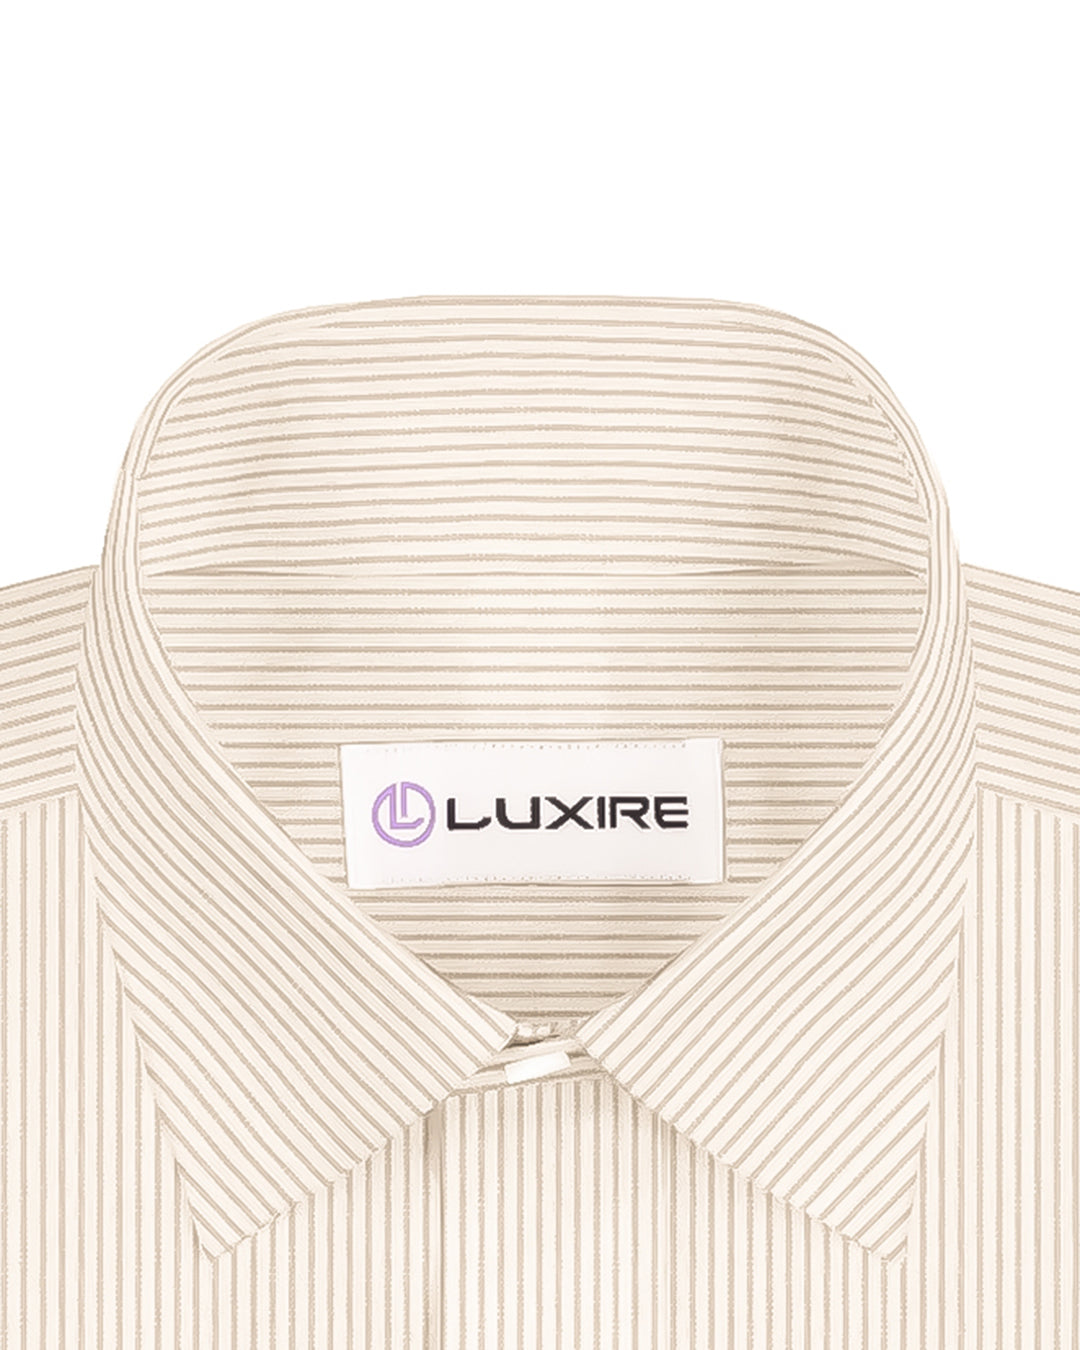 Collar of the custom linen shirt for men in white with brown dress stripes by Luxire Clothing